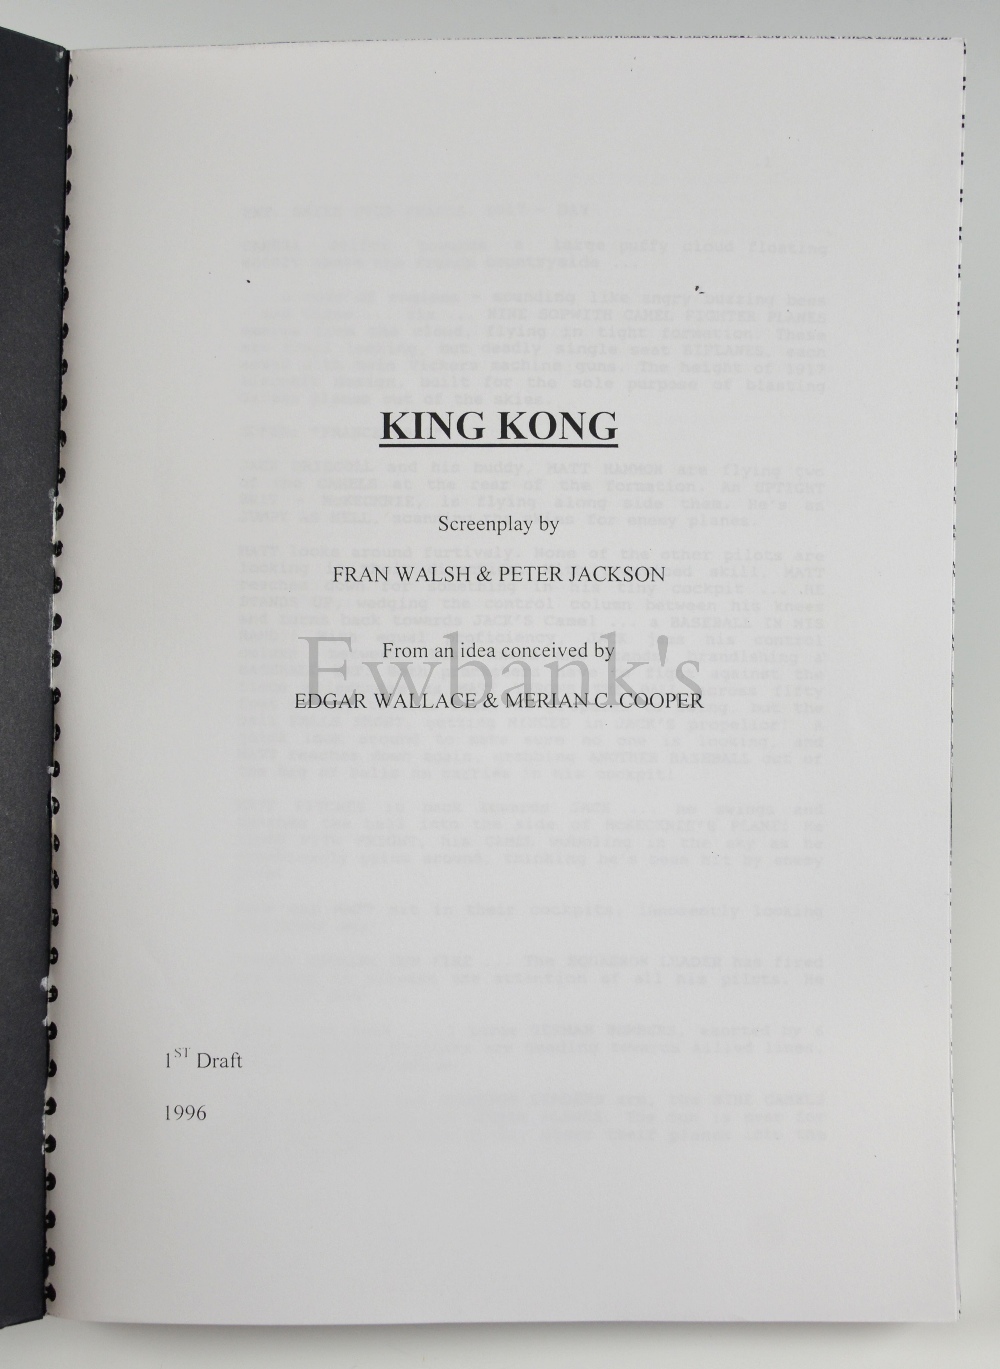 King Kong (1996) A copy of the script, first draft, by Peter Jackson and Fran Walsh, 107 pages,